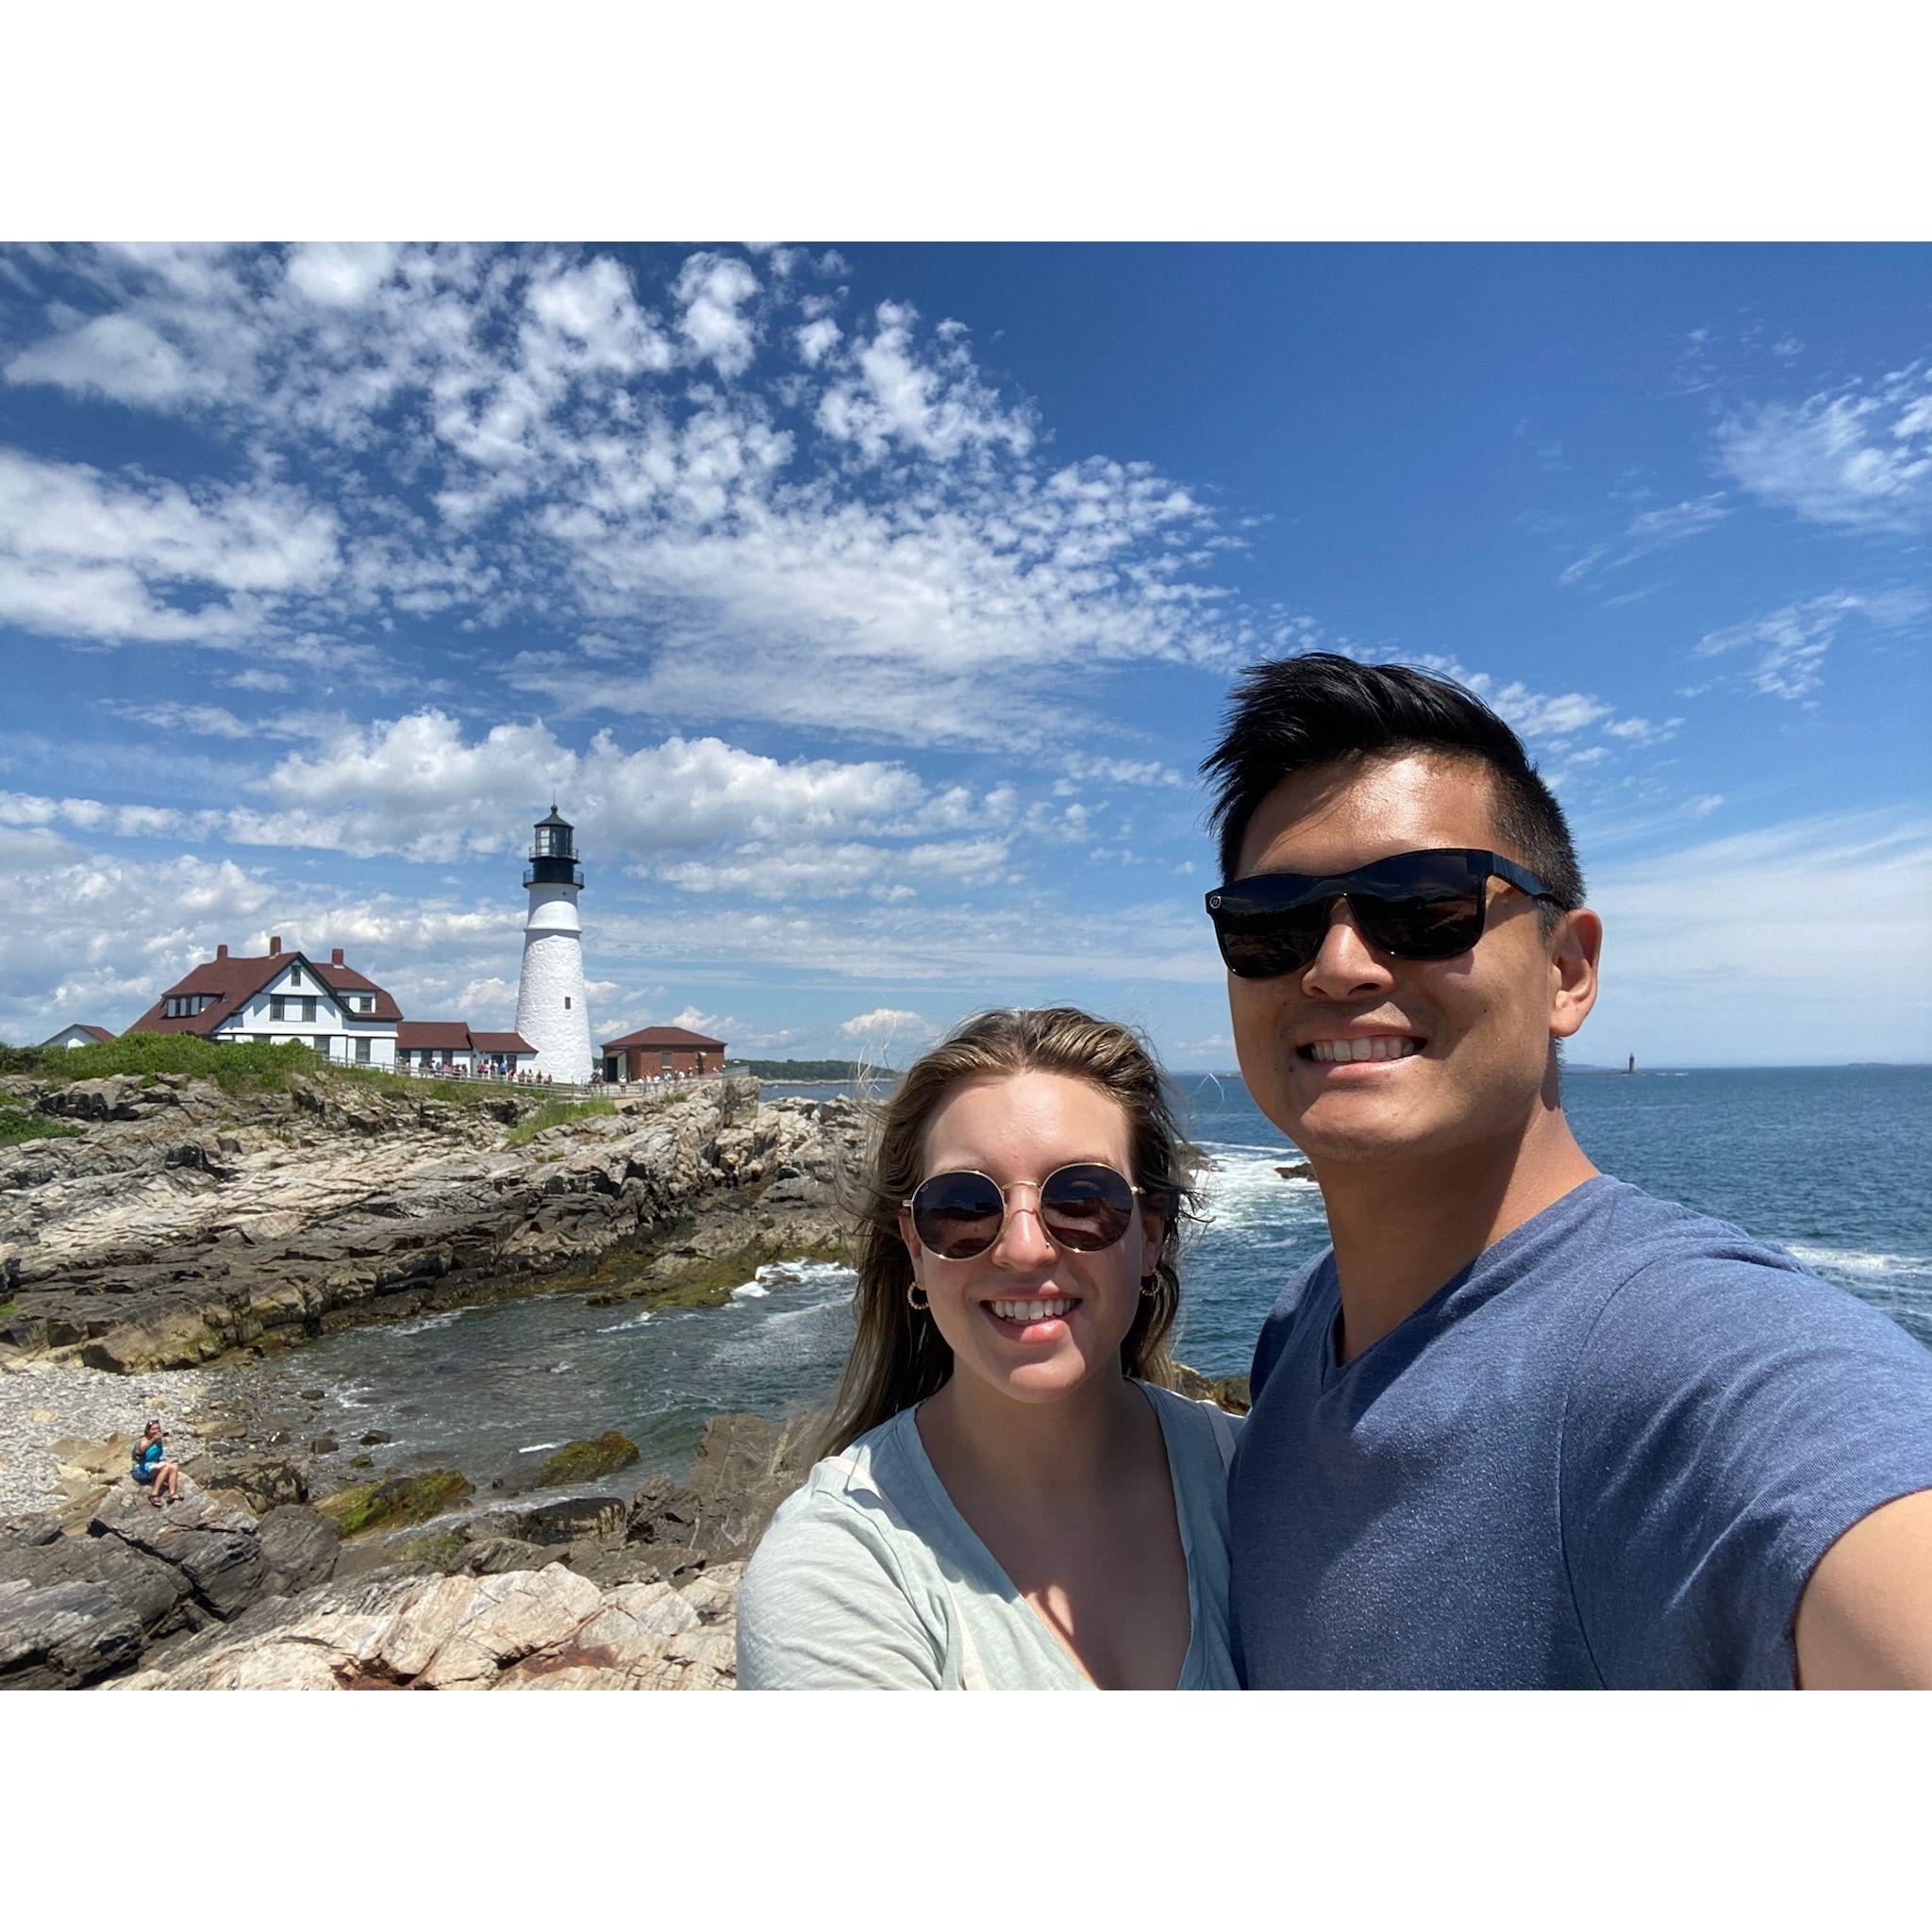 Portland, Maine light house! Portland is possibly where we will move after Taylor finishes CRNA school!